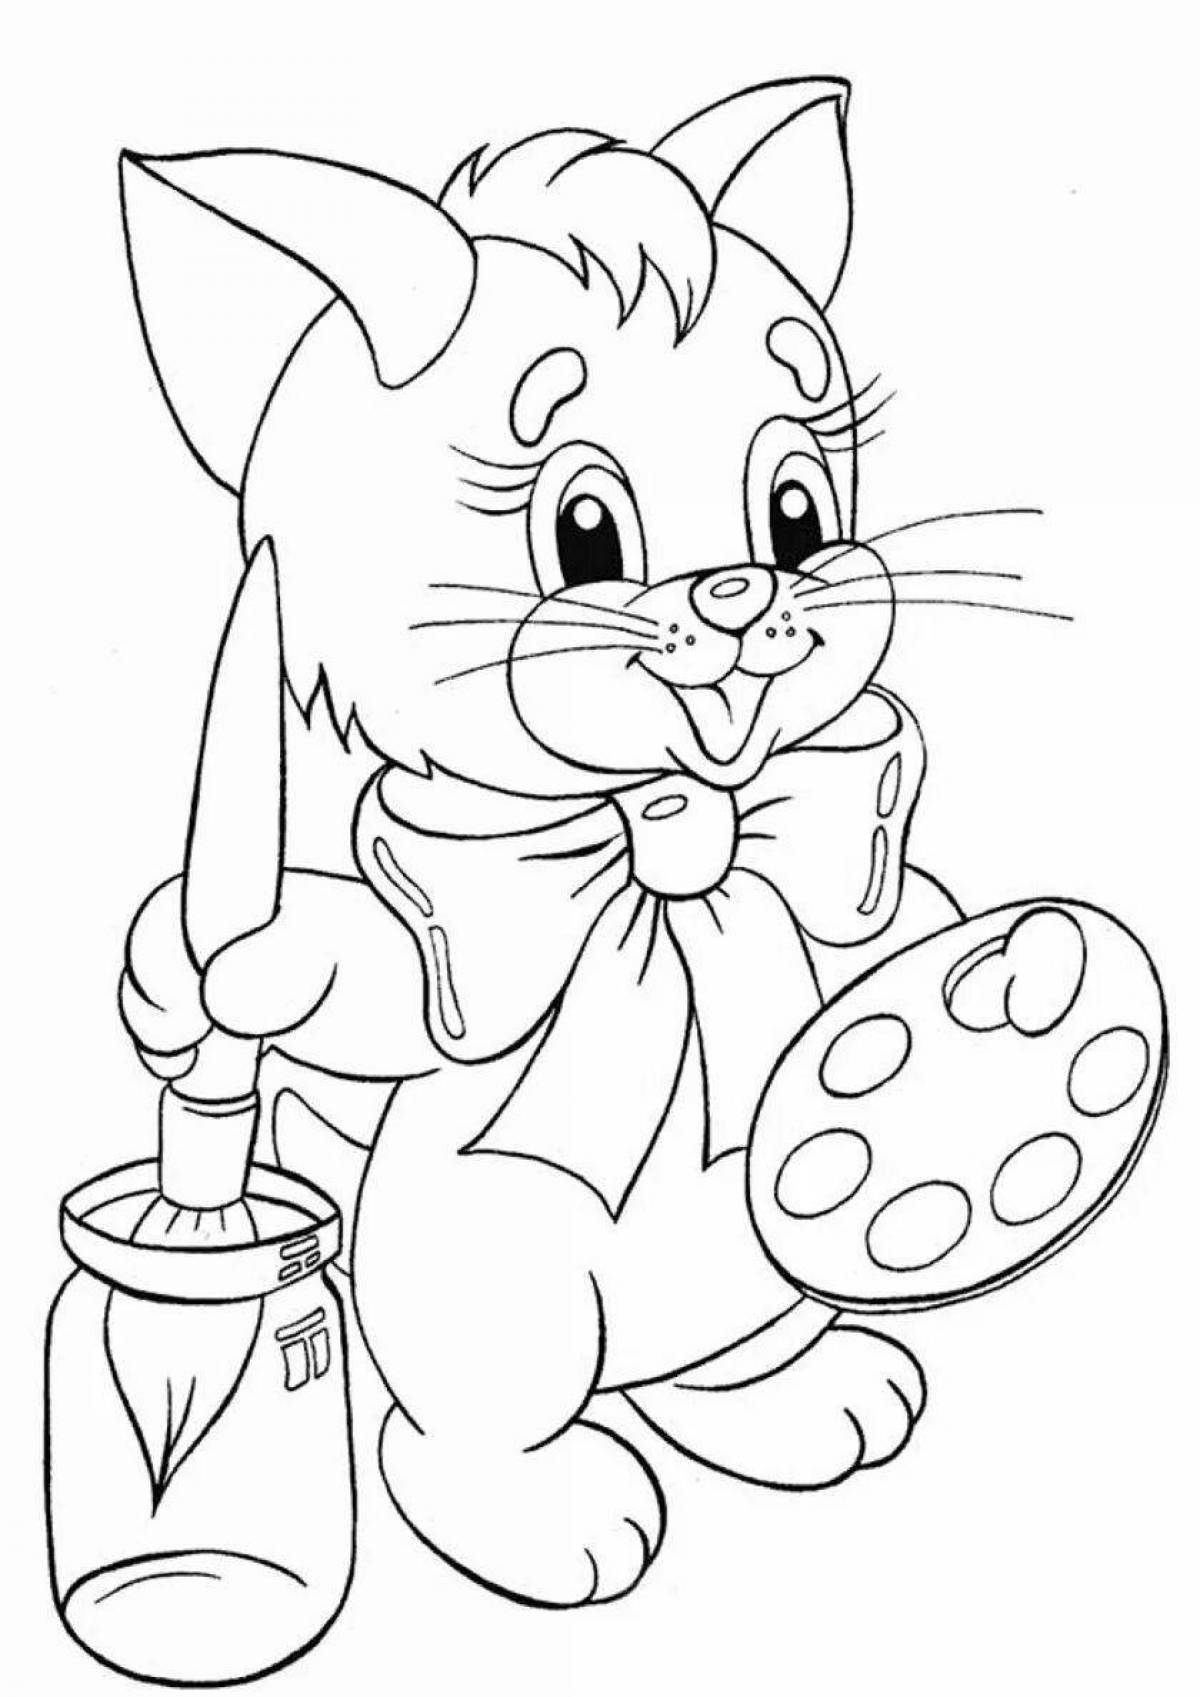 Printout of color explosion coloring page